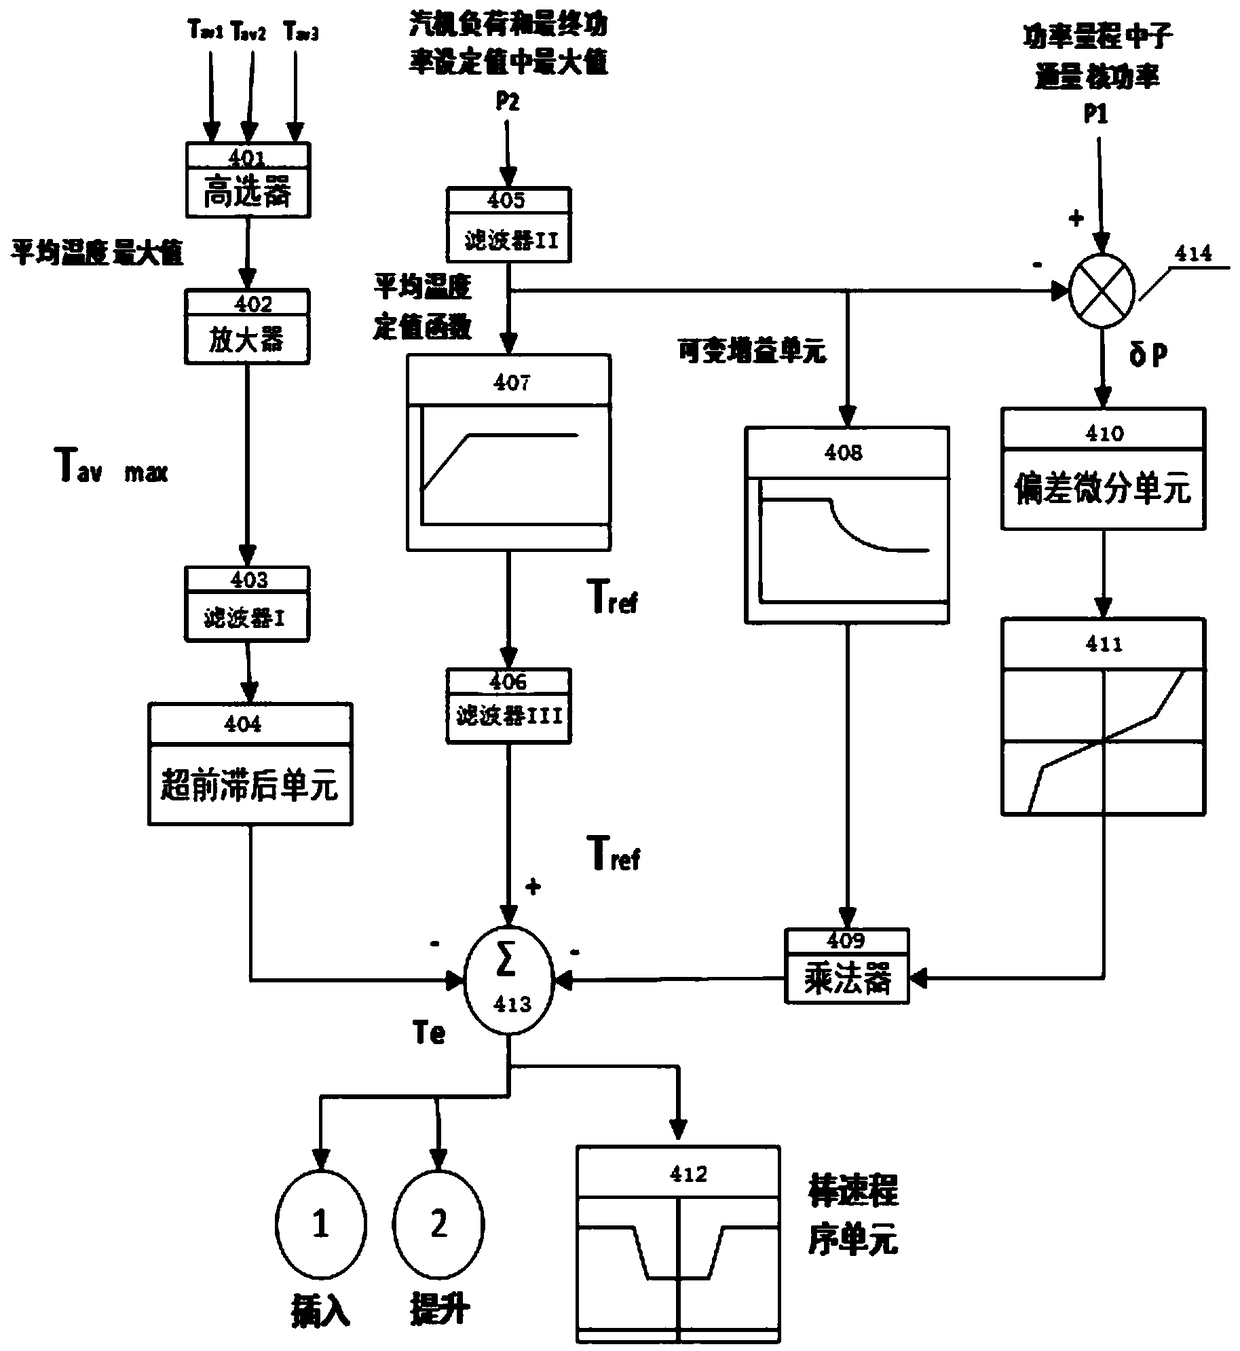 A nuclear power unit simulation model comprising a power control system